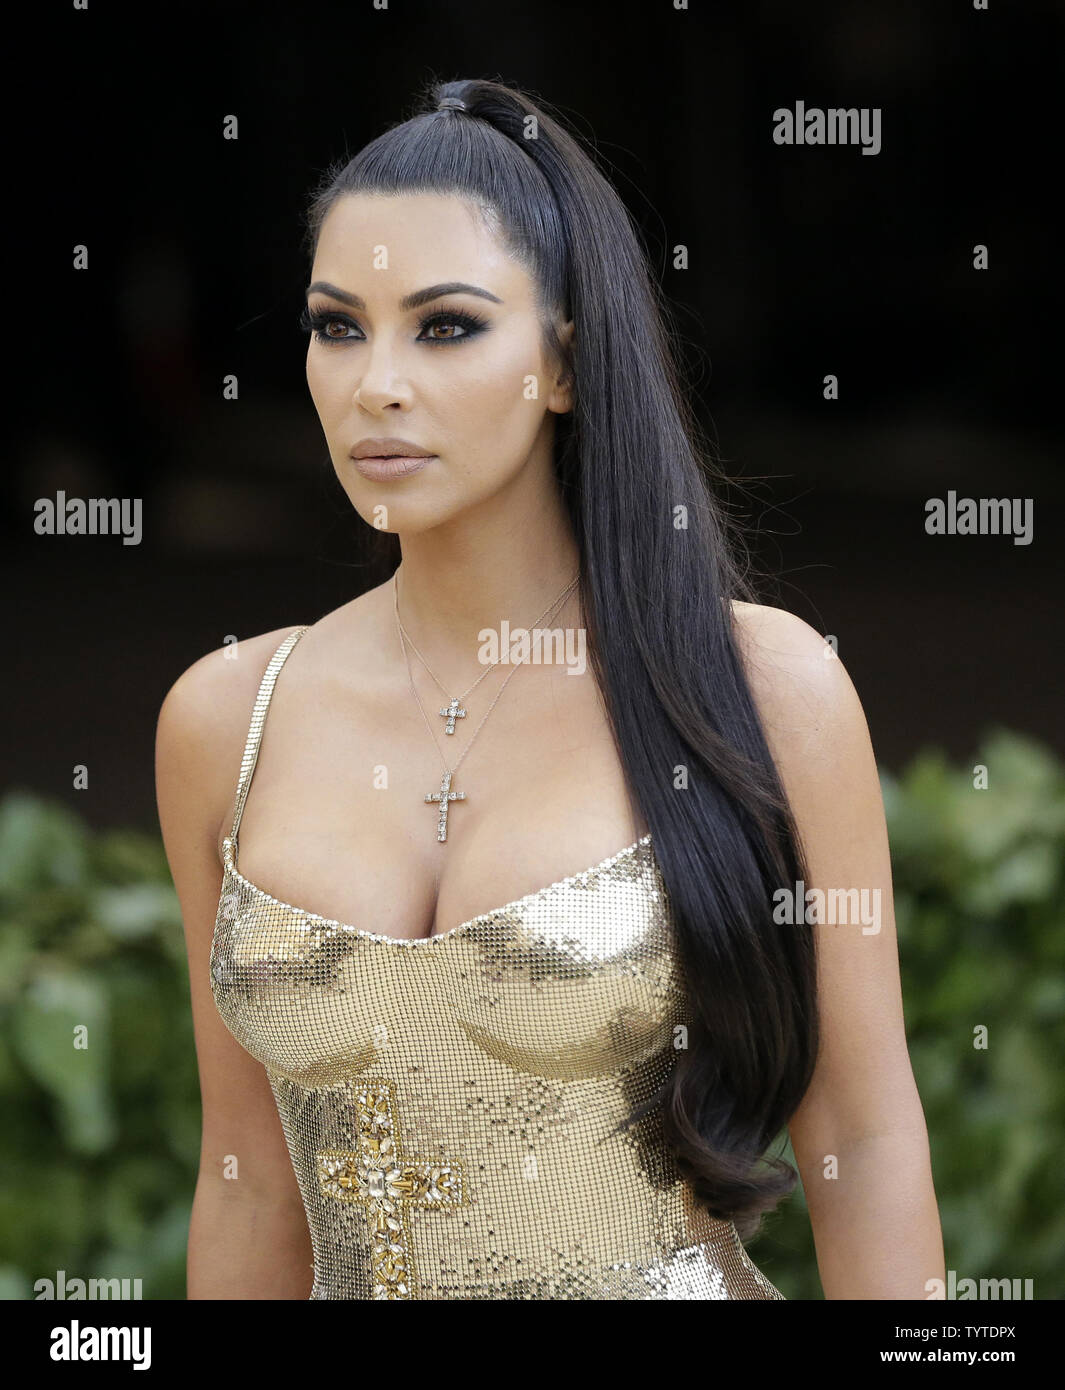 Kimberly Kardashian West arrives on the red carpet at The Metropolitan Museum of Art's Costume Institute Benefit 'Heavenly Bodies: Fashion and the Catholic Imagination' at Metropolitan Museum of Art in New York City on May 7, 2018.       Photo by John Angelillo/UPI Stock Photo